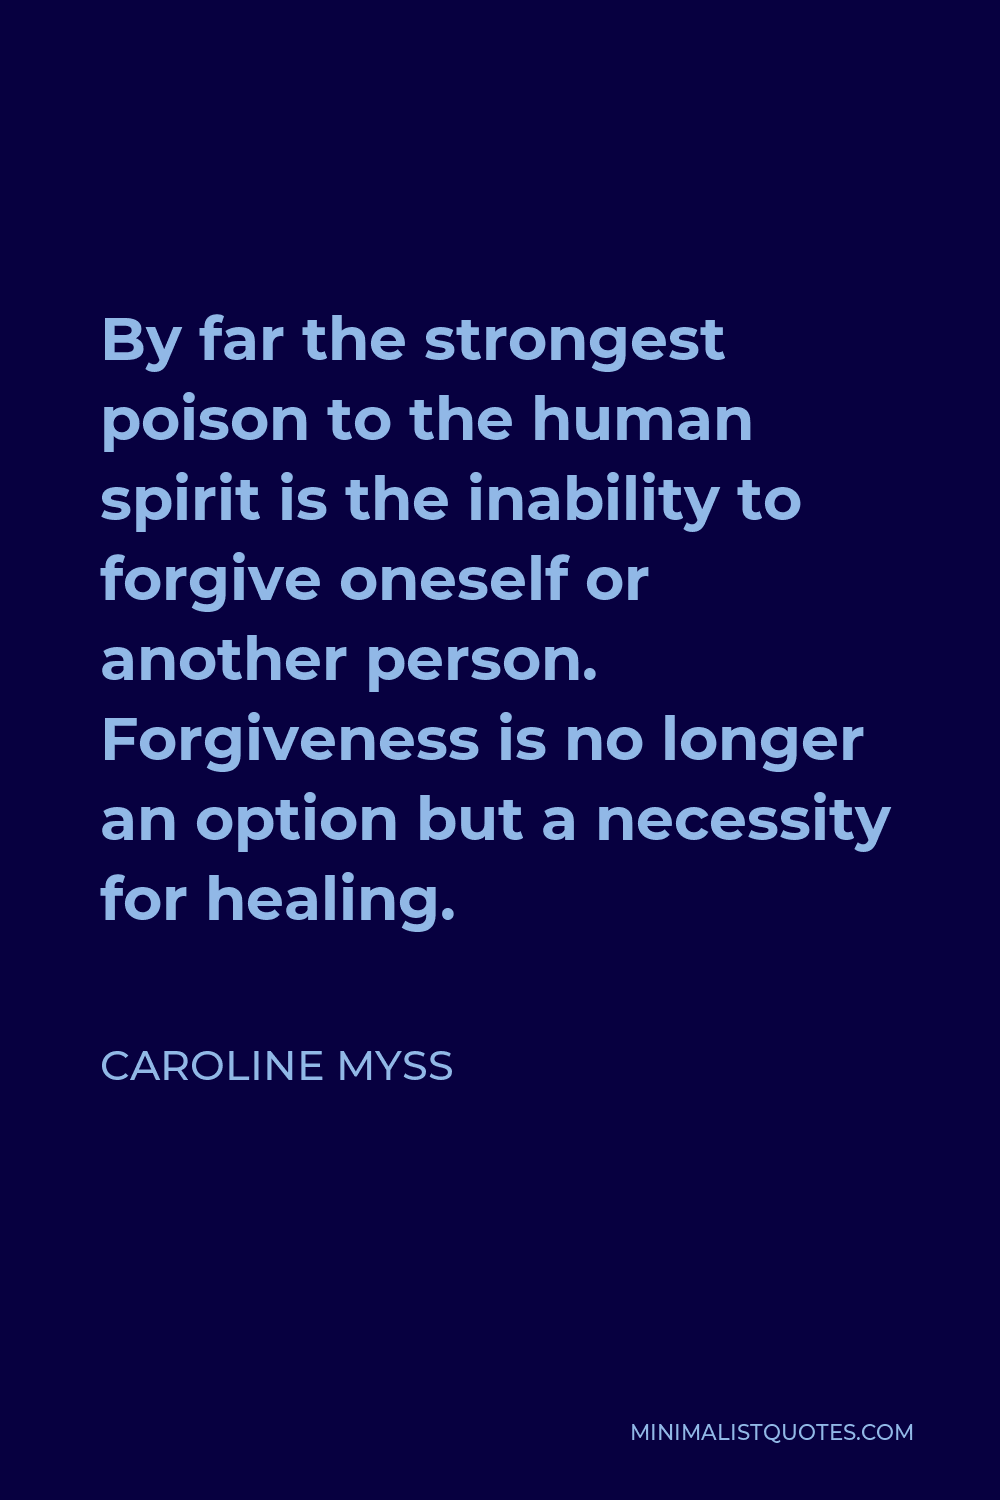 Caroline Myss Quote - By far the strongest poison to the human spirit is the inability to forgive oneself or another person. Forgiveness is no longer an option but a necessity for healing.